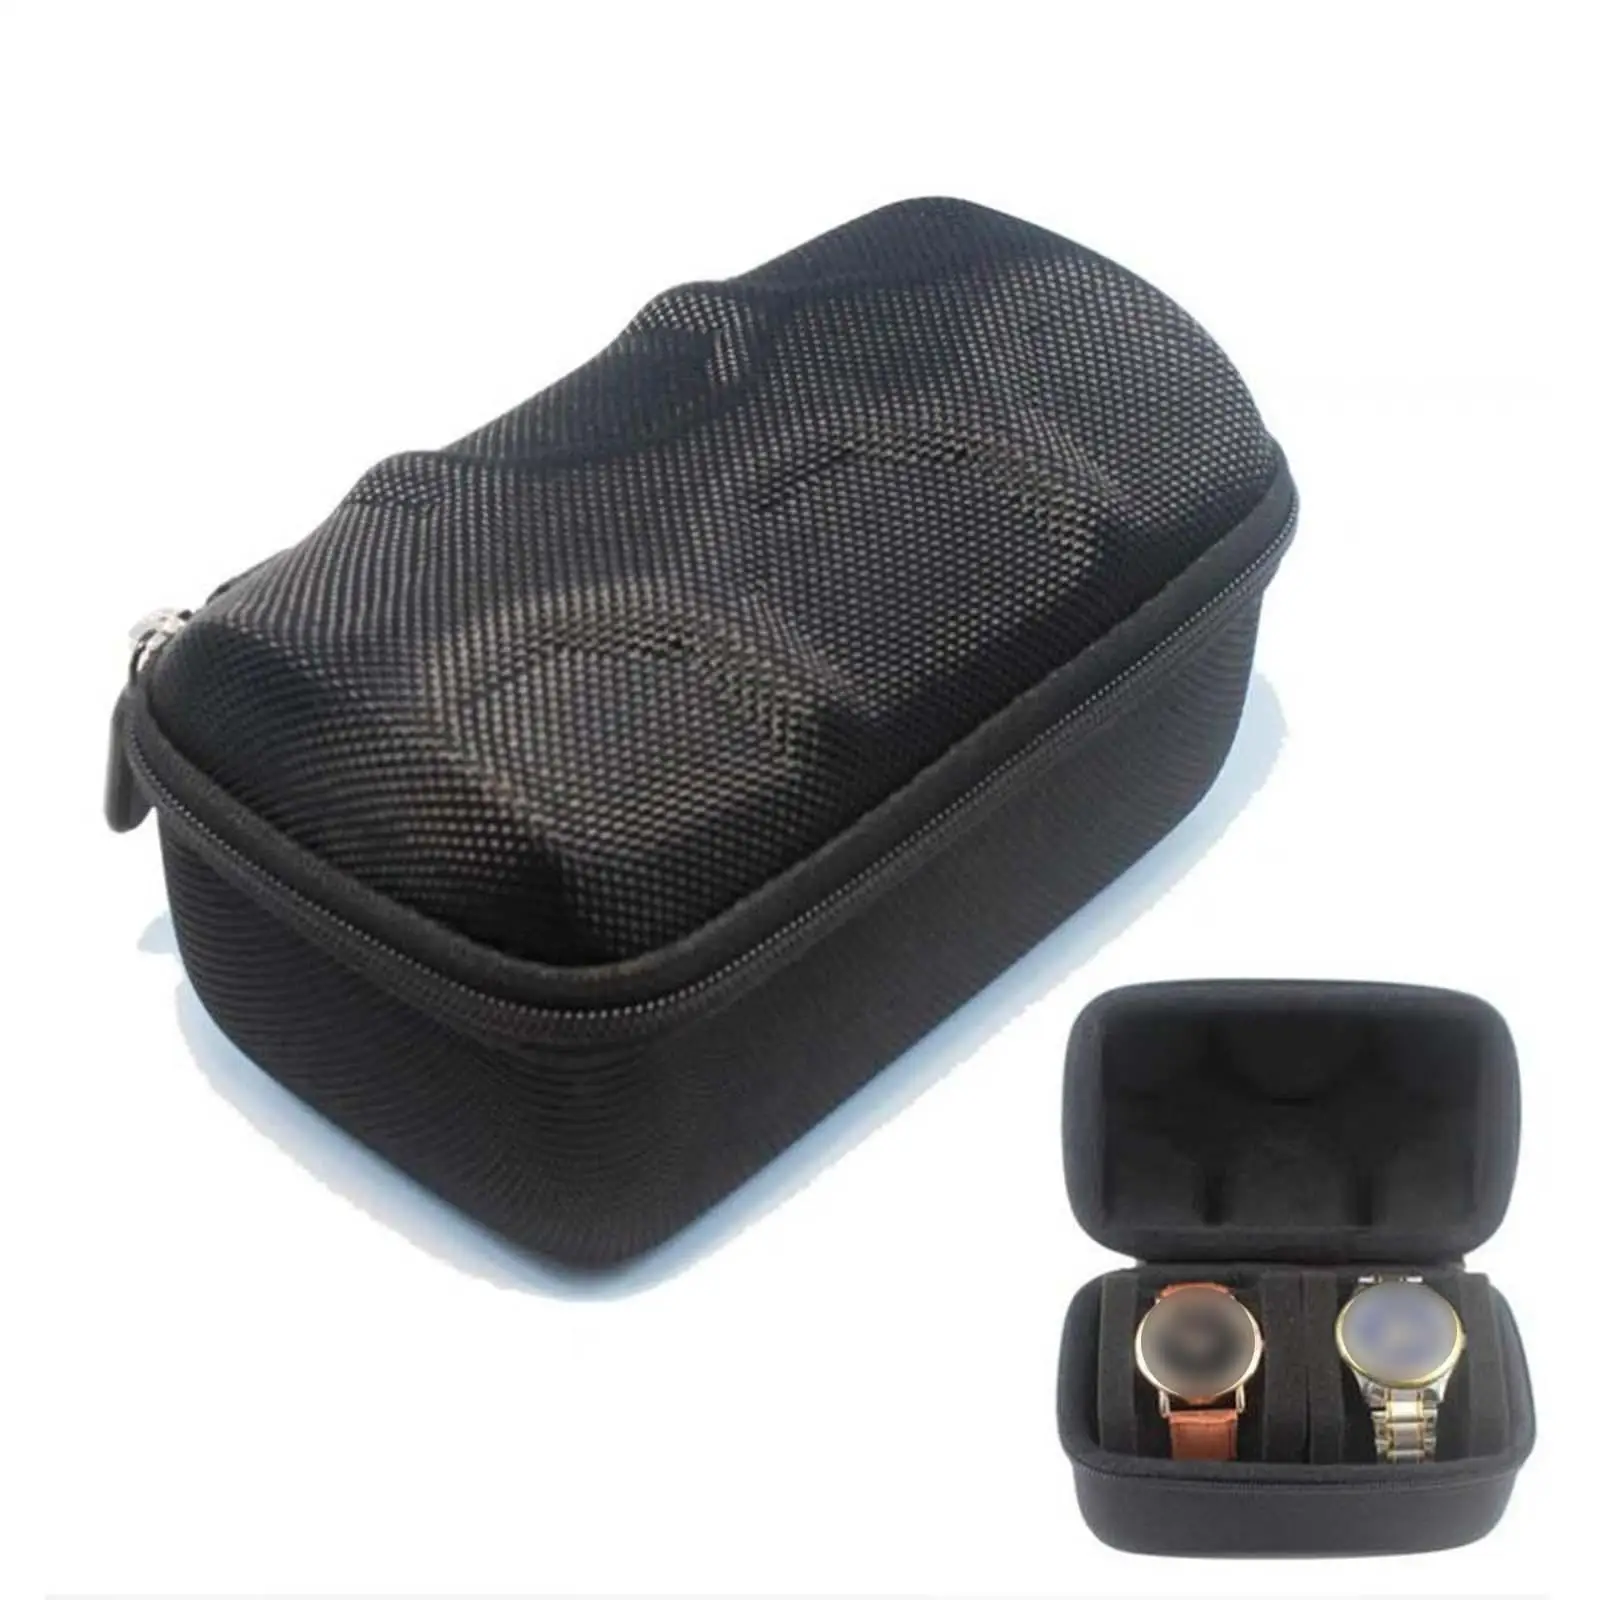 Watch Case Shockproof Zipper Case Anti-Fall with Anti-Move Watch  for Men and Women